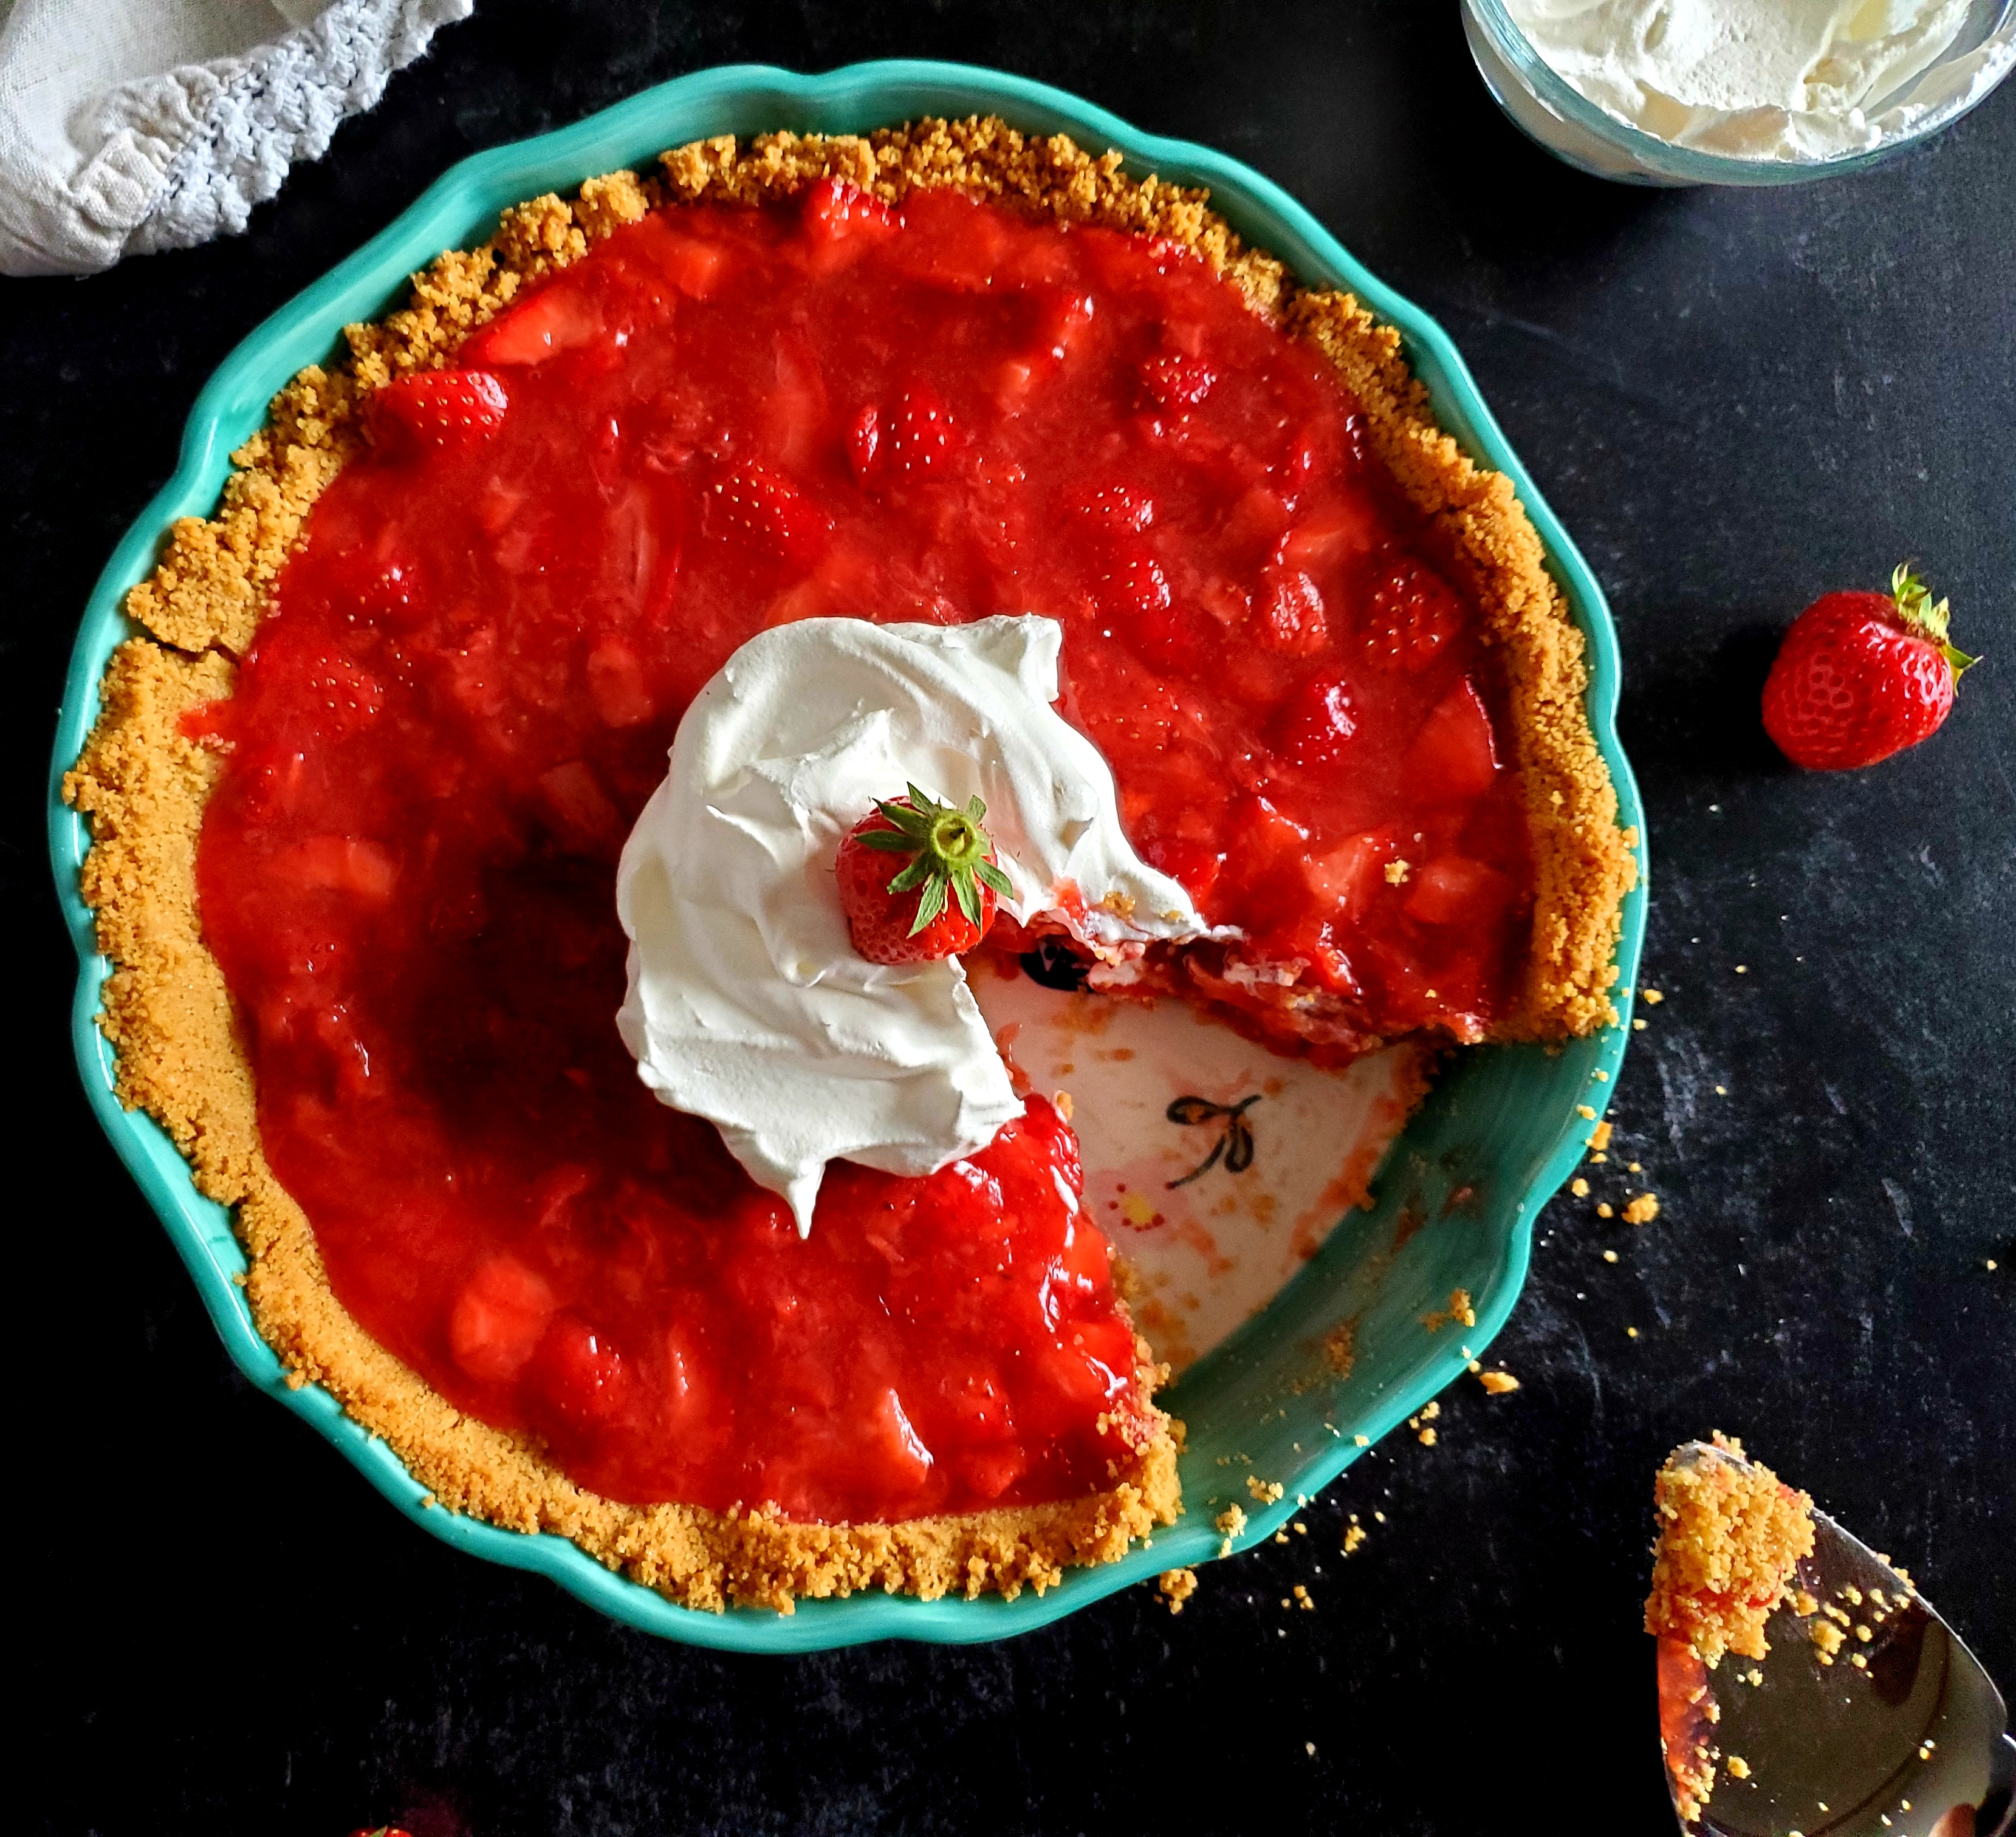 Strawberry Pie and whipped cream